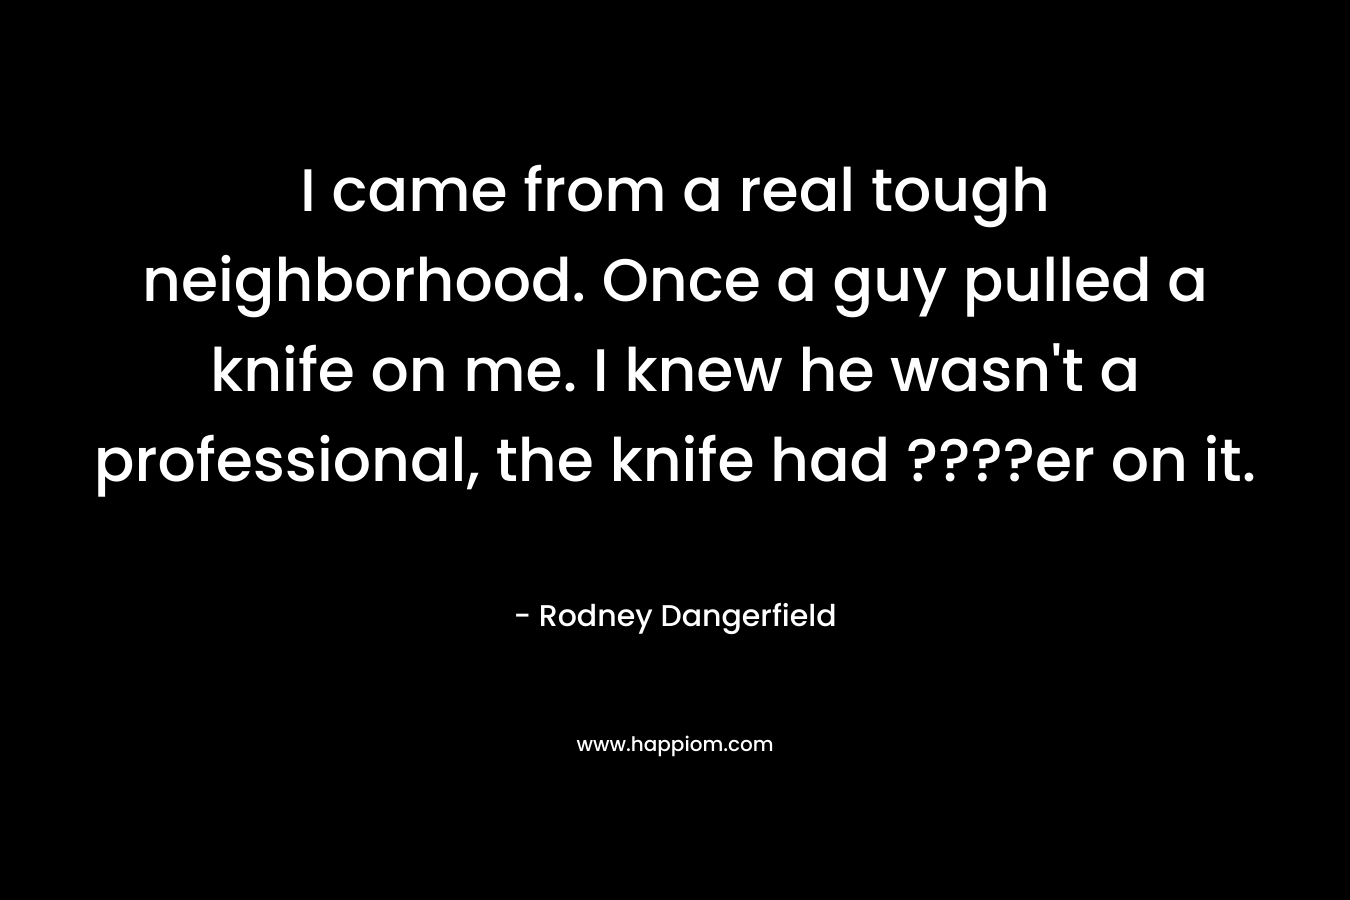 I came from a real tough neighborhood. Once a guy pulled a knife on me. I knew he wasn't a professional, the knife had ????er on it.